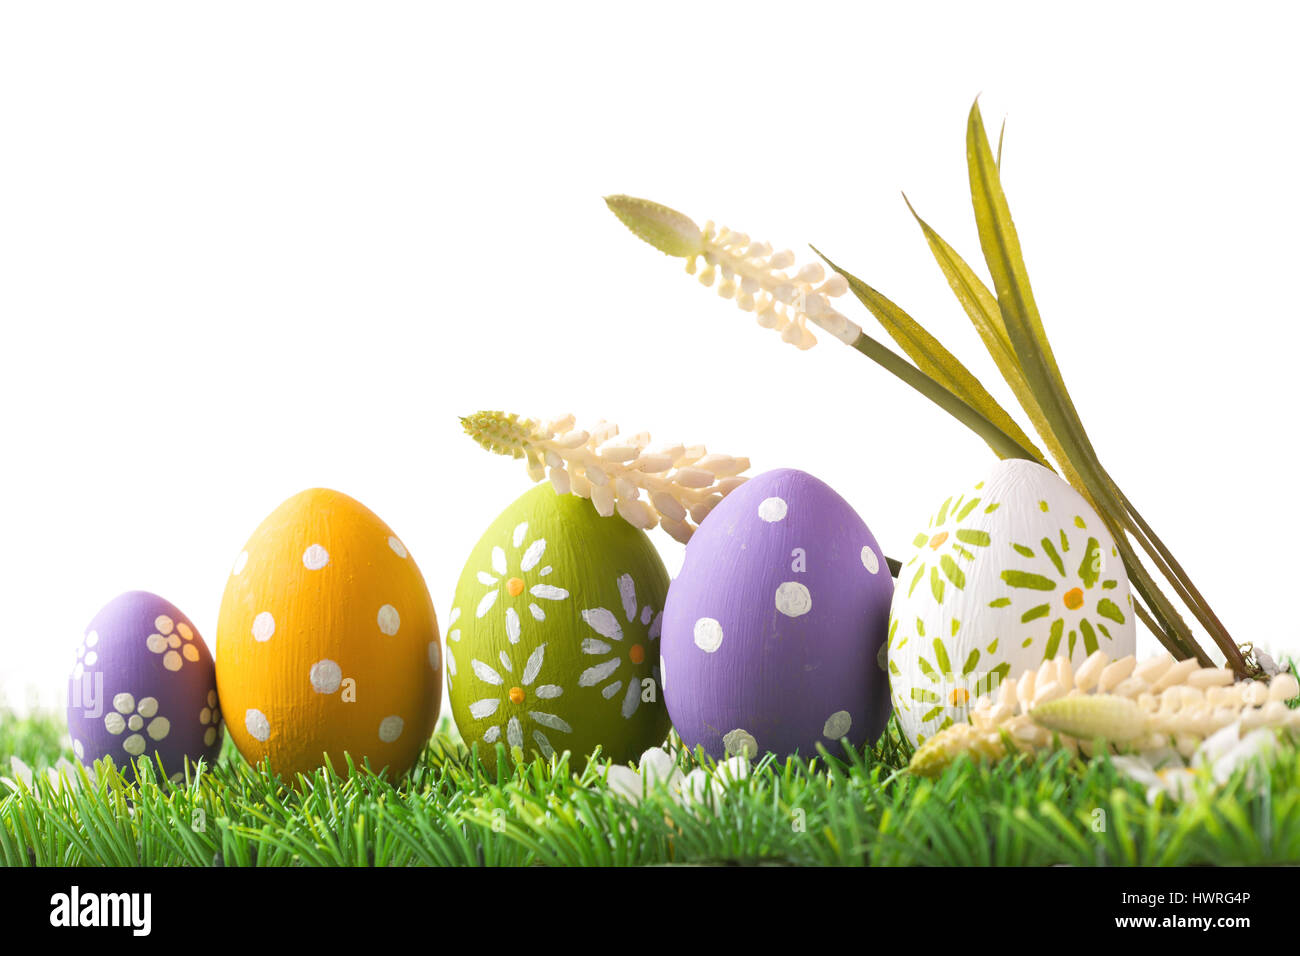 Bunch of easter eggs in pastel colors on grass, isolated on white background Stock Photo